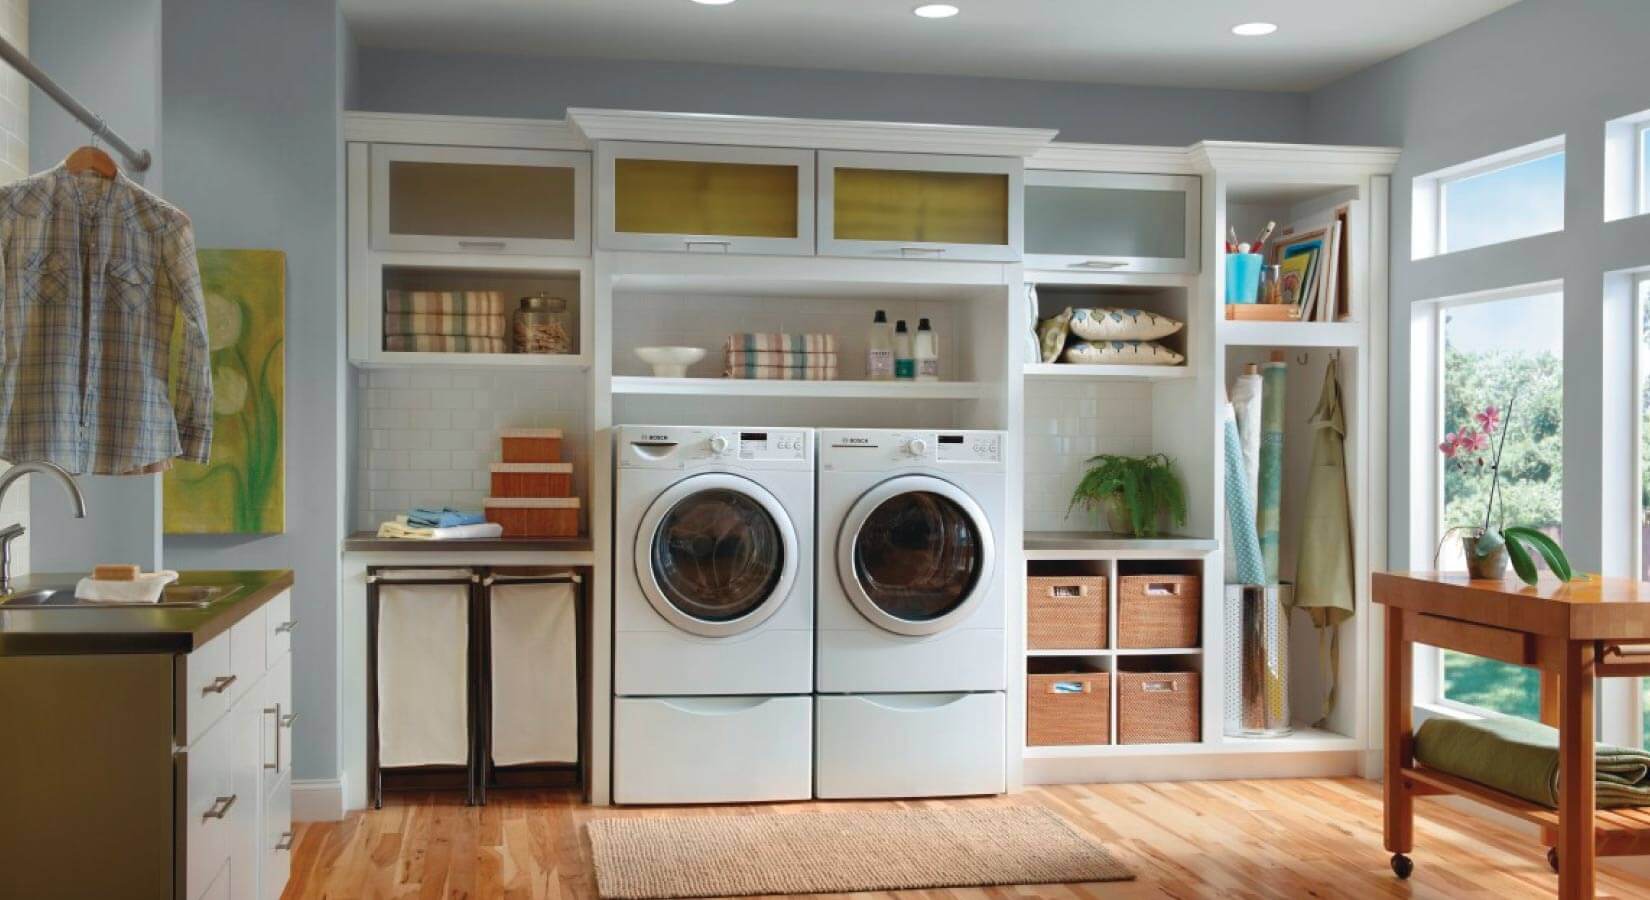 Laundry room with white appliances in a white open shelving unit with frosted glass cabinets on top.